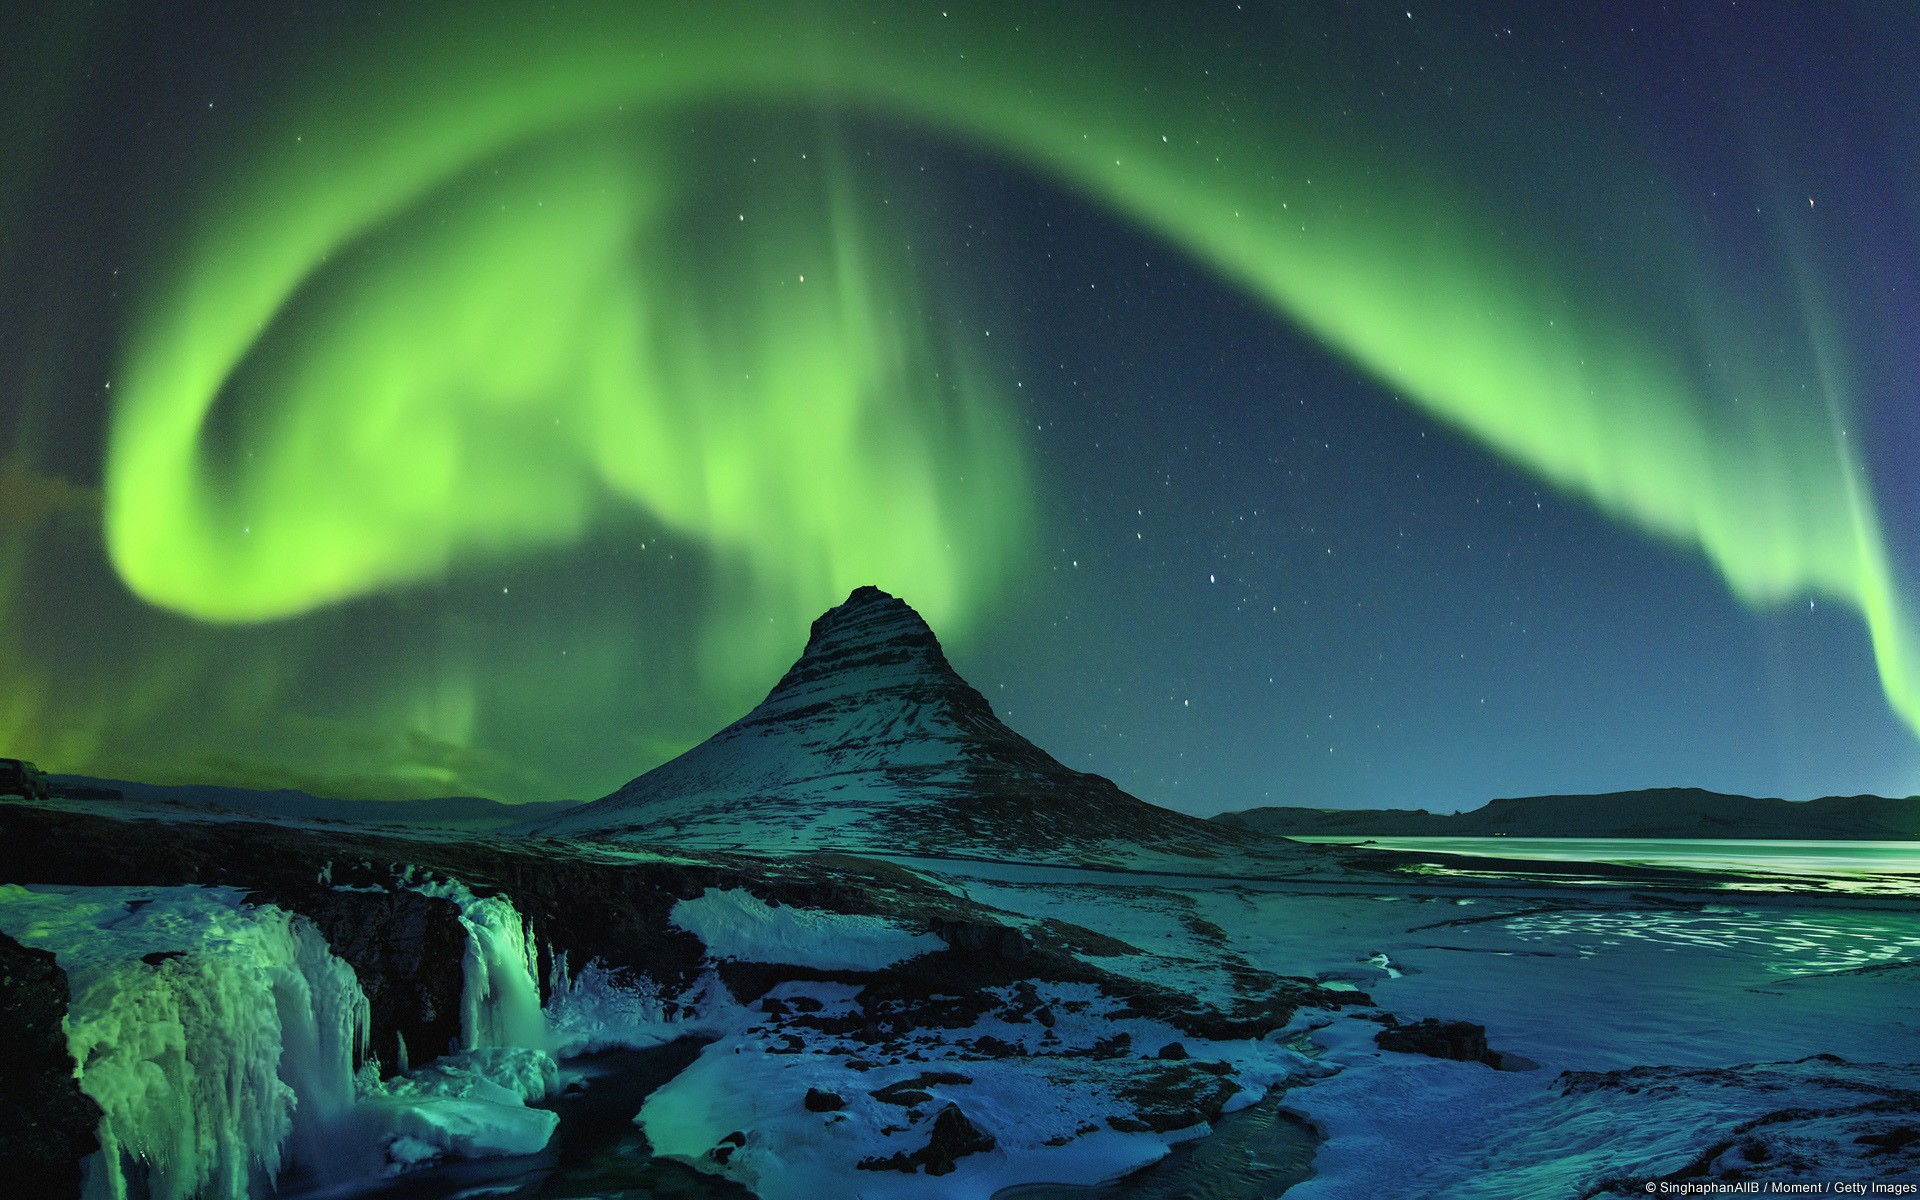 General 1920x1200 mountains river nature landscape aurorae nordic landscapes low light Iceland Kirkjufell watermarked